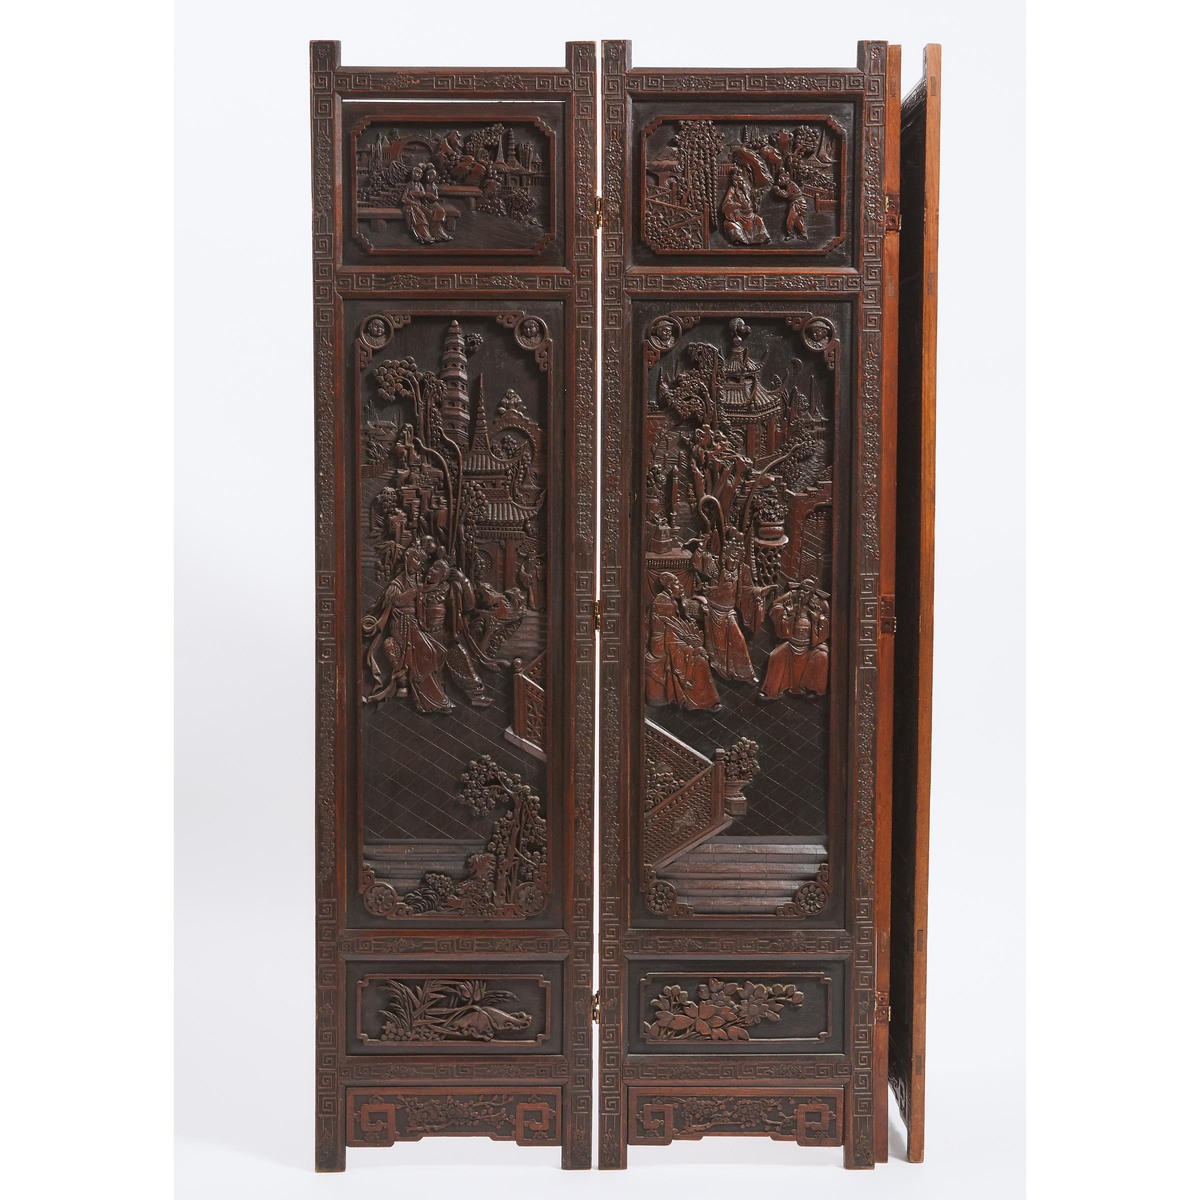 A Chinese Carved Wood 'Three Kingdoms' Four-Panel Floor Screen, Mid 20th Century, 民国 木雕人物故事纹屏风四扇, he - Image 2 of 4